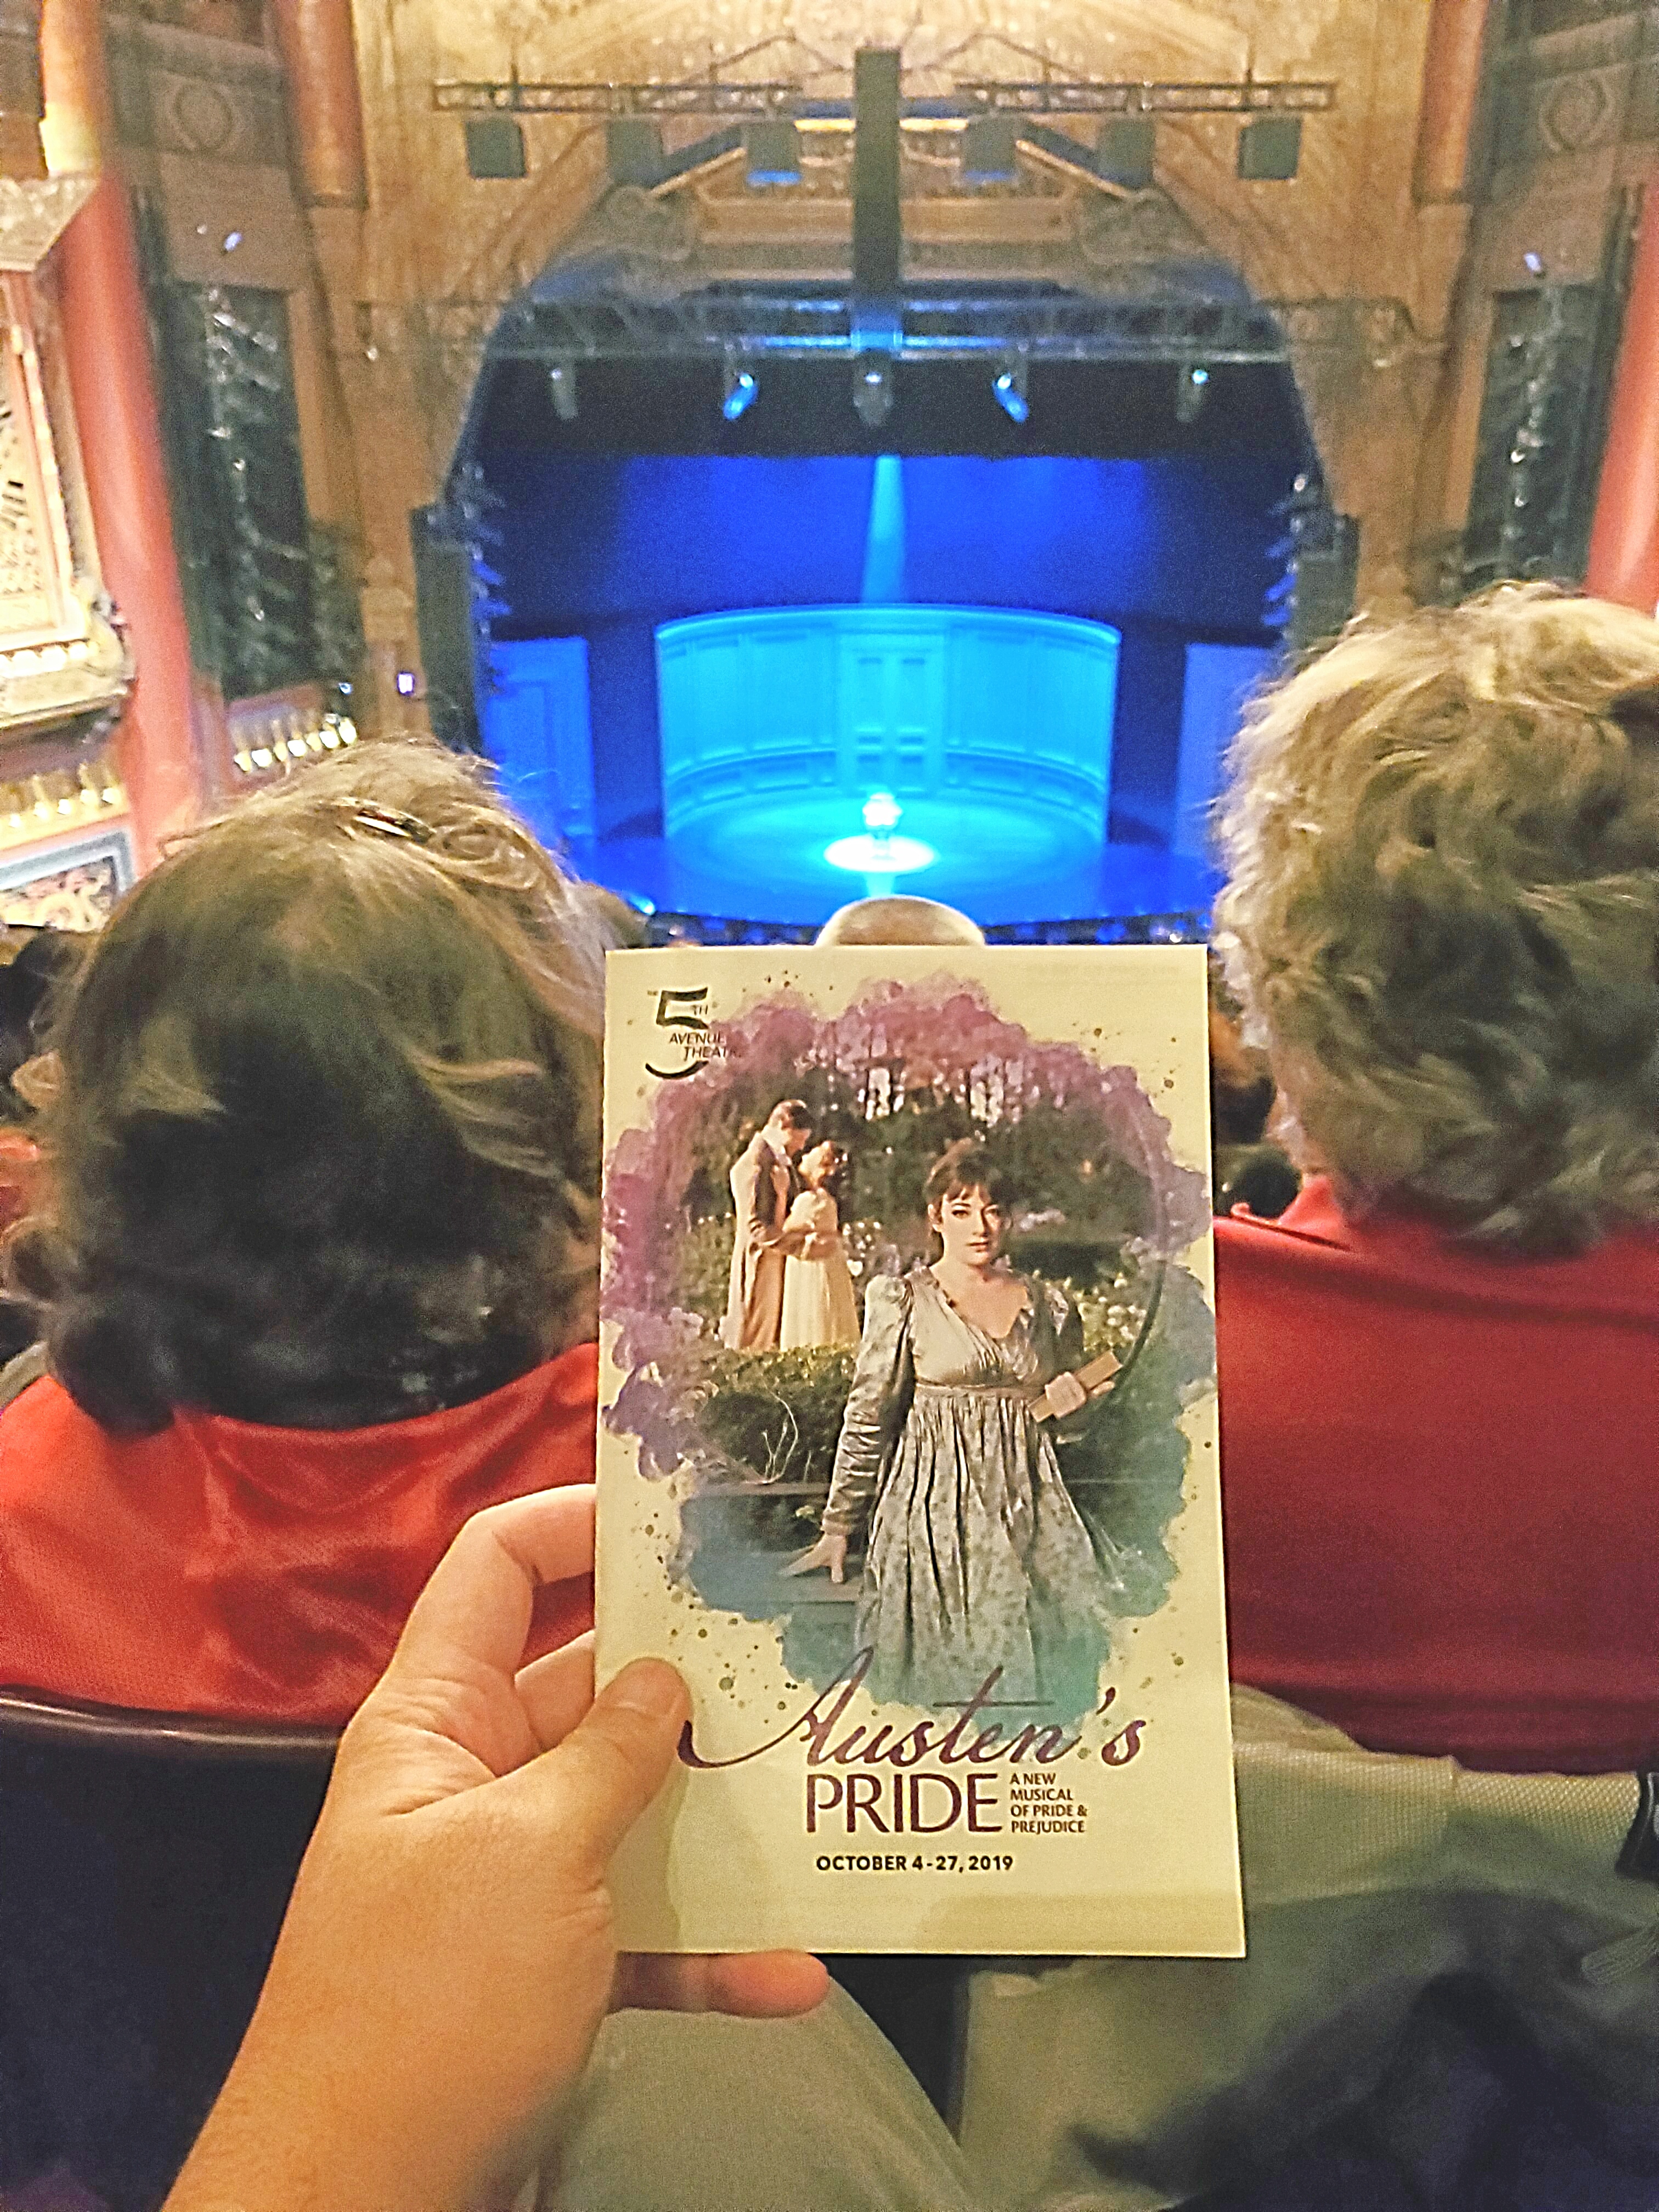 Austen's Pride: A New Musical of Pride and Prejudice at The 5th Avenue Theatre. Well-portrayed Miss Bingley & Lady Catherine de Bourgh. Good theater company but sadly a #tepid #musical. #JaneAusten #MrDarcy